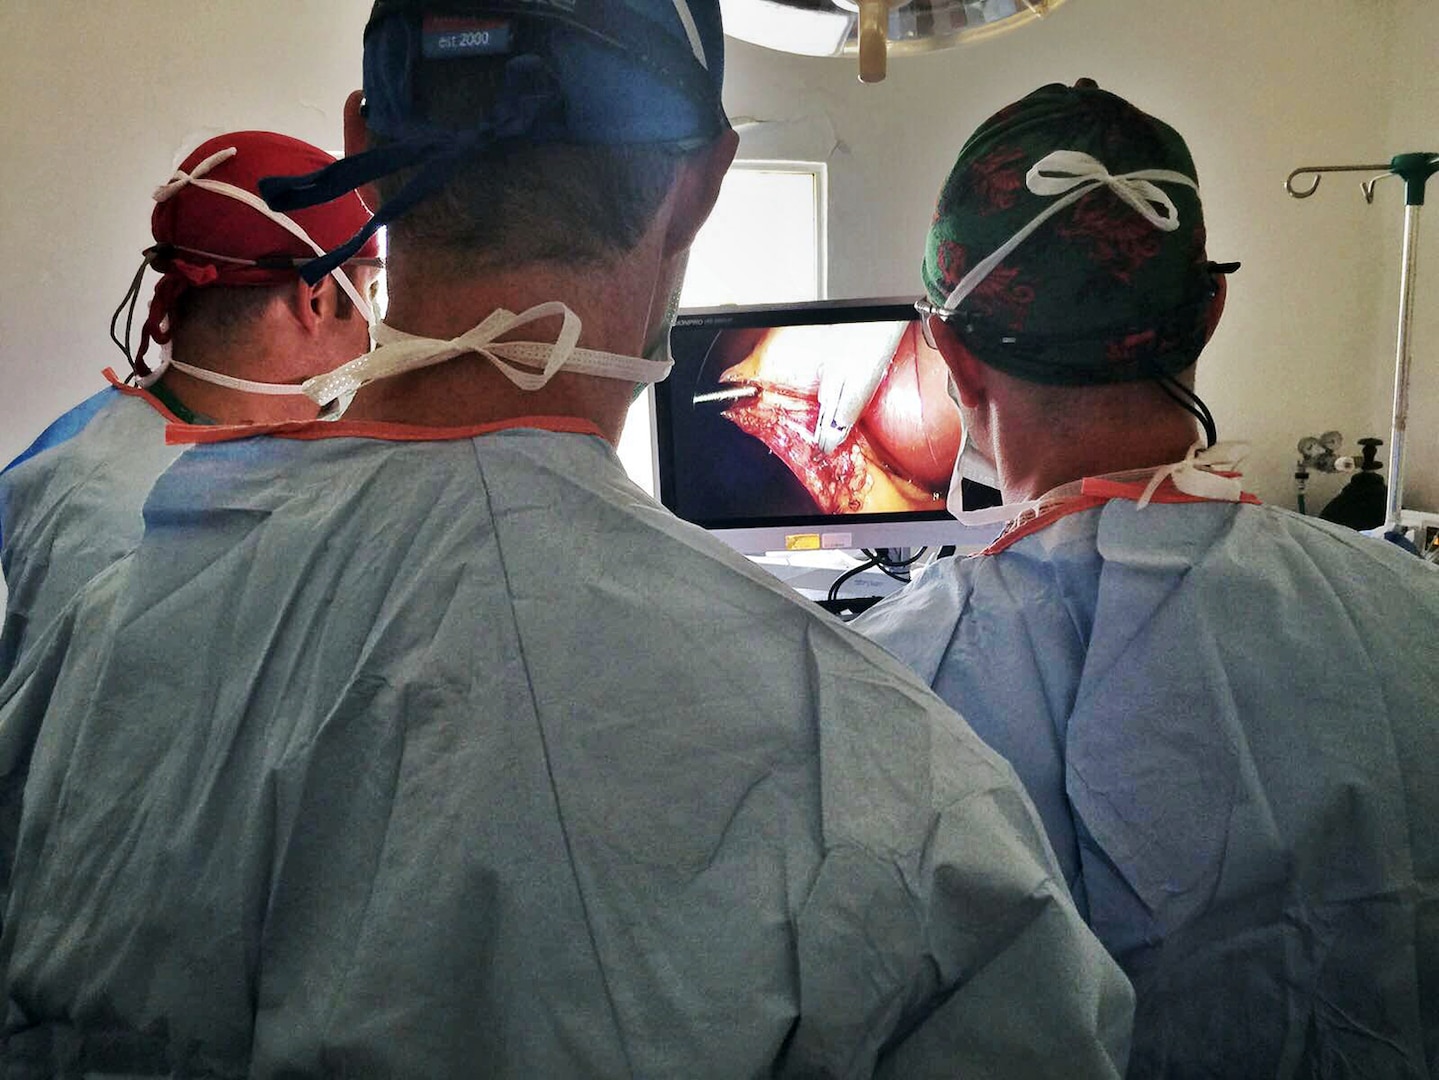 A general surgery team performs laparoscopic gallbladder removal surgery during New Horizons 2016 in the Dominican Republic. Laparoscopic surgical capability was available during New Horizons for the first time this year. The annual U.S. Southern Command-led readiness training exercise brought military civil engineers and medics together to provide humanitarian, dental and medical services to communities in the small Caribbean nation. (Courtesy photo)